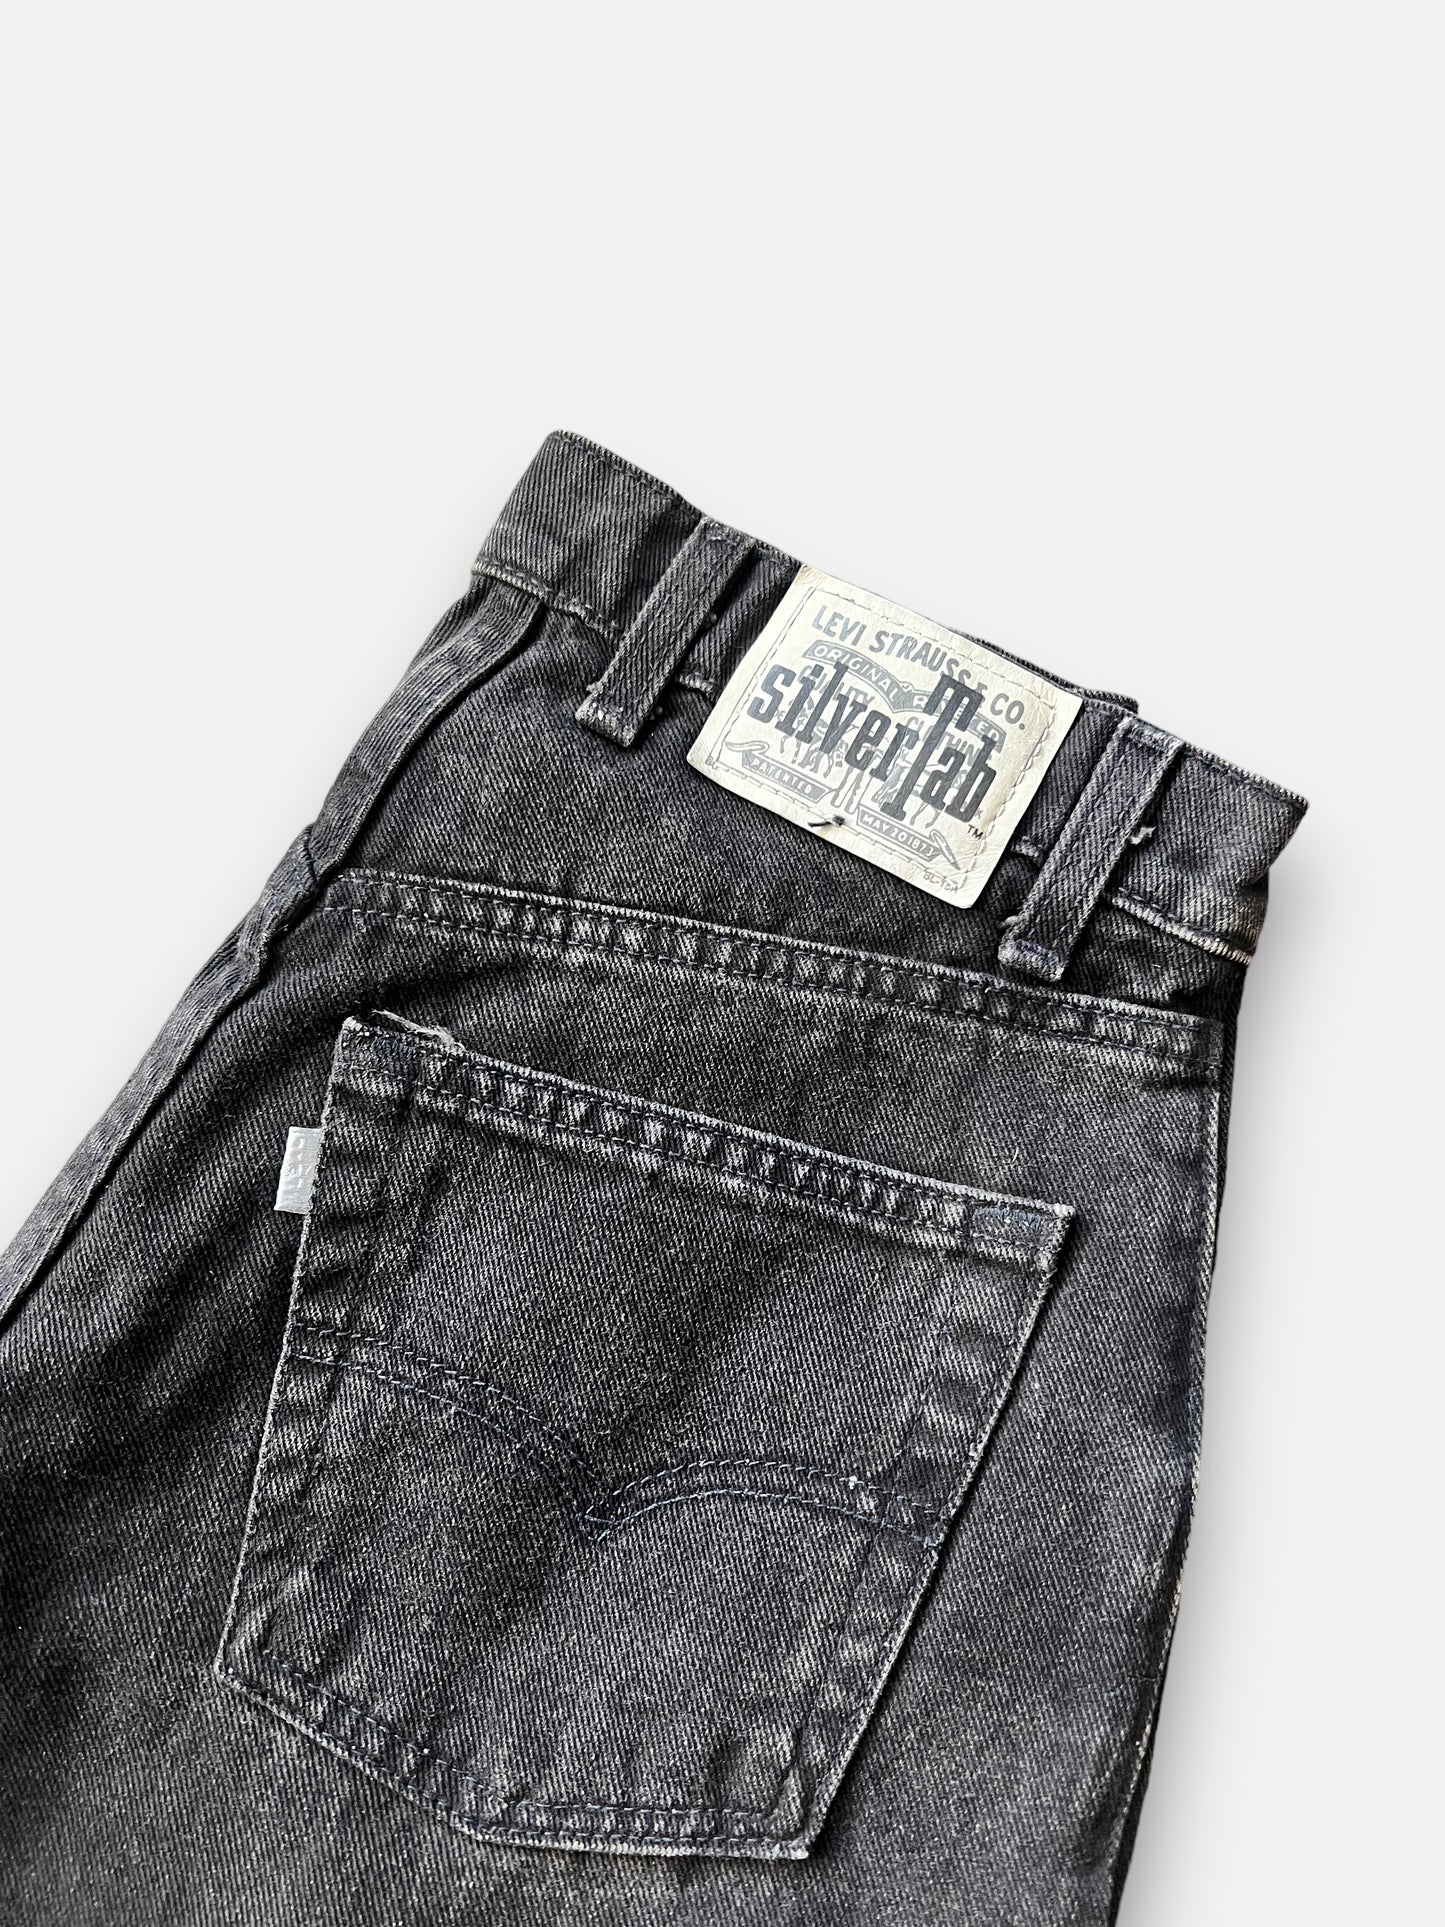 90s Levi's Silver Tab Baggy (29x34)